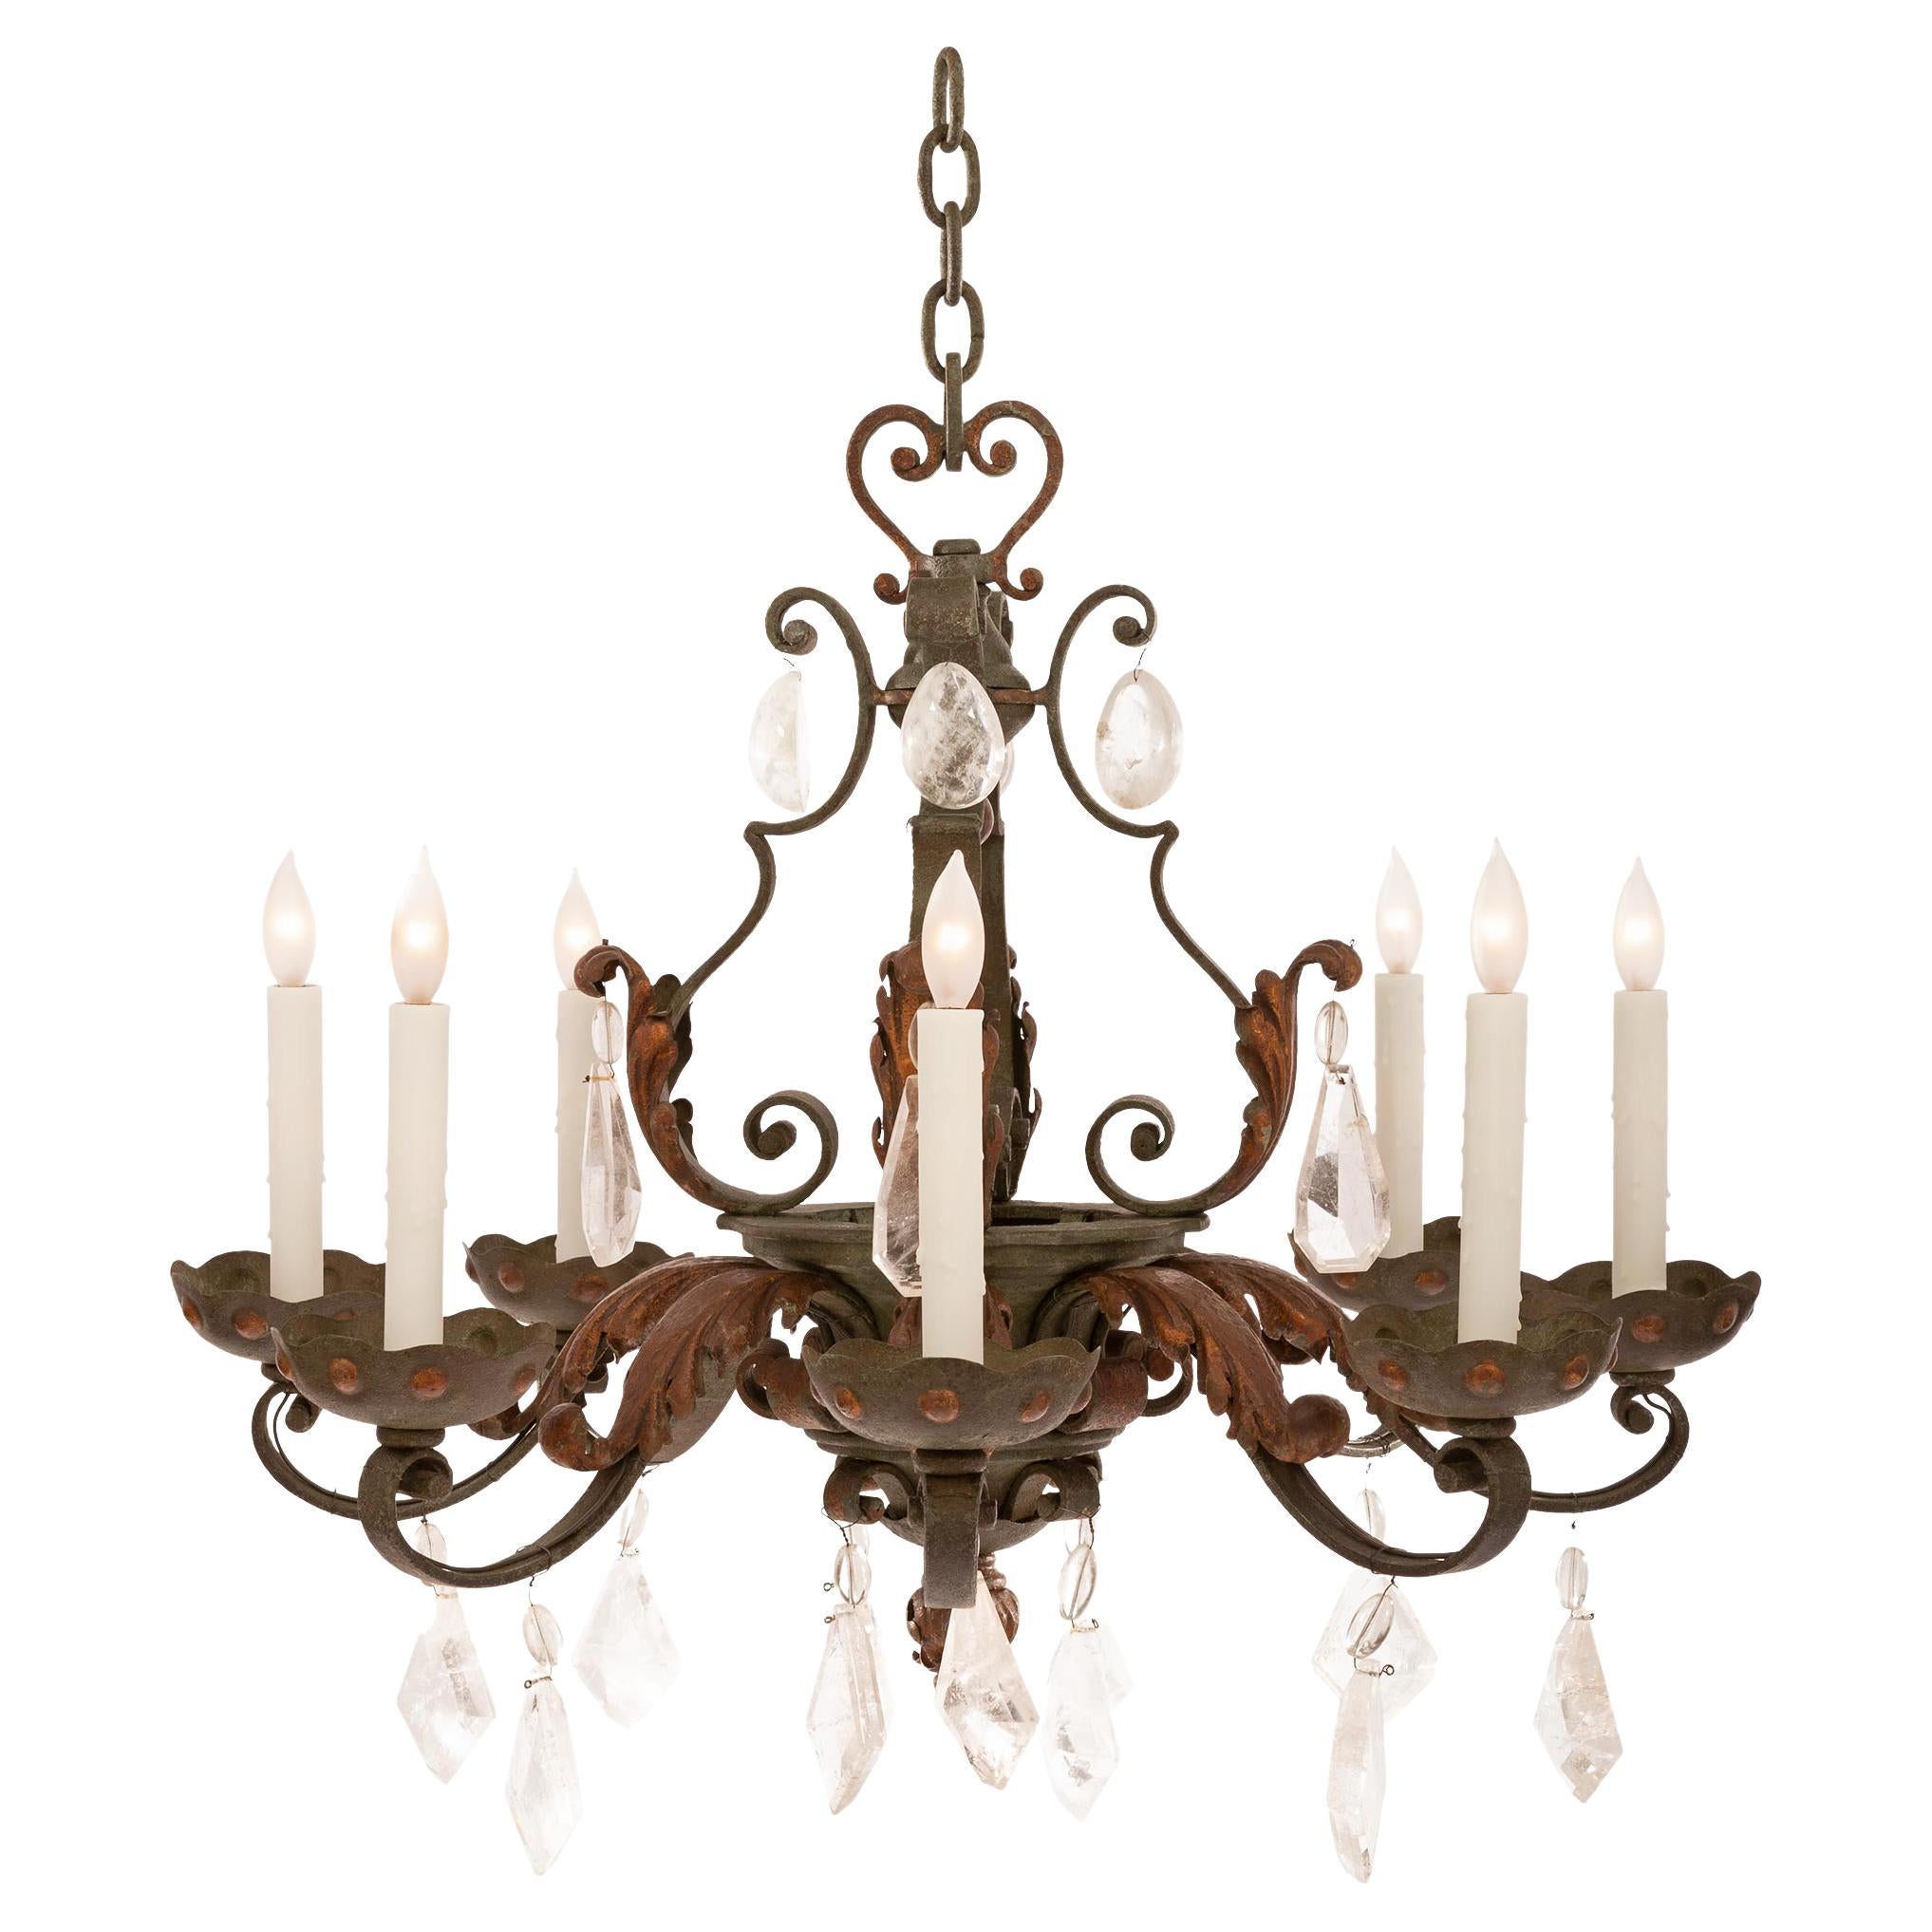 Late 19th Century Country French Wrought Iron and Rock Crystal Chandelier For Sale